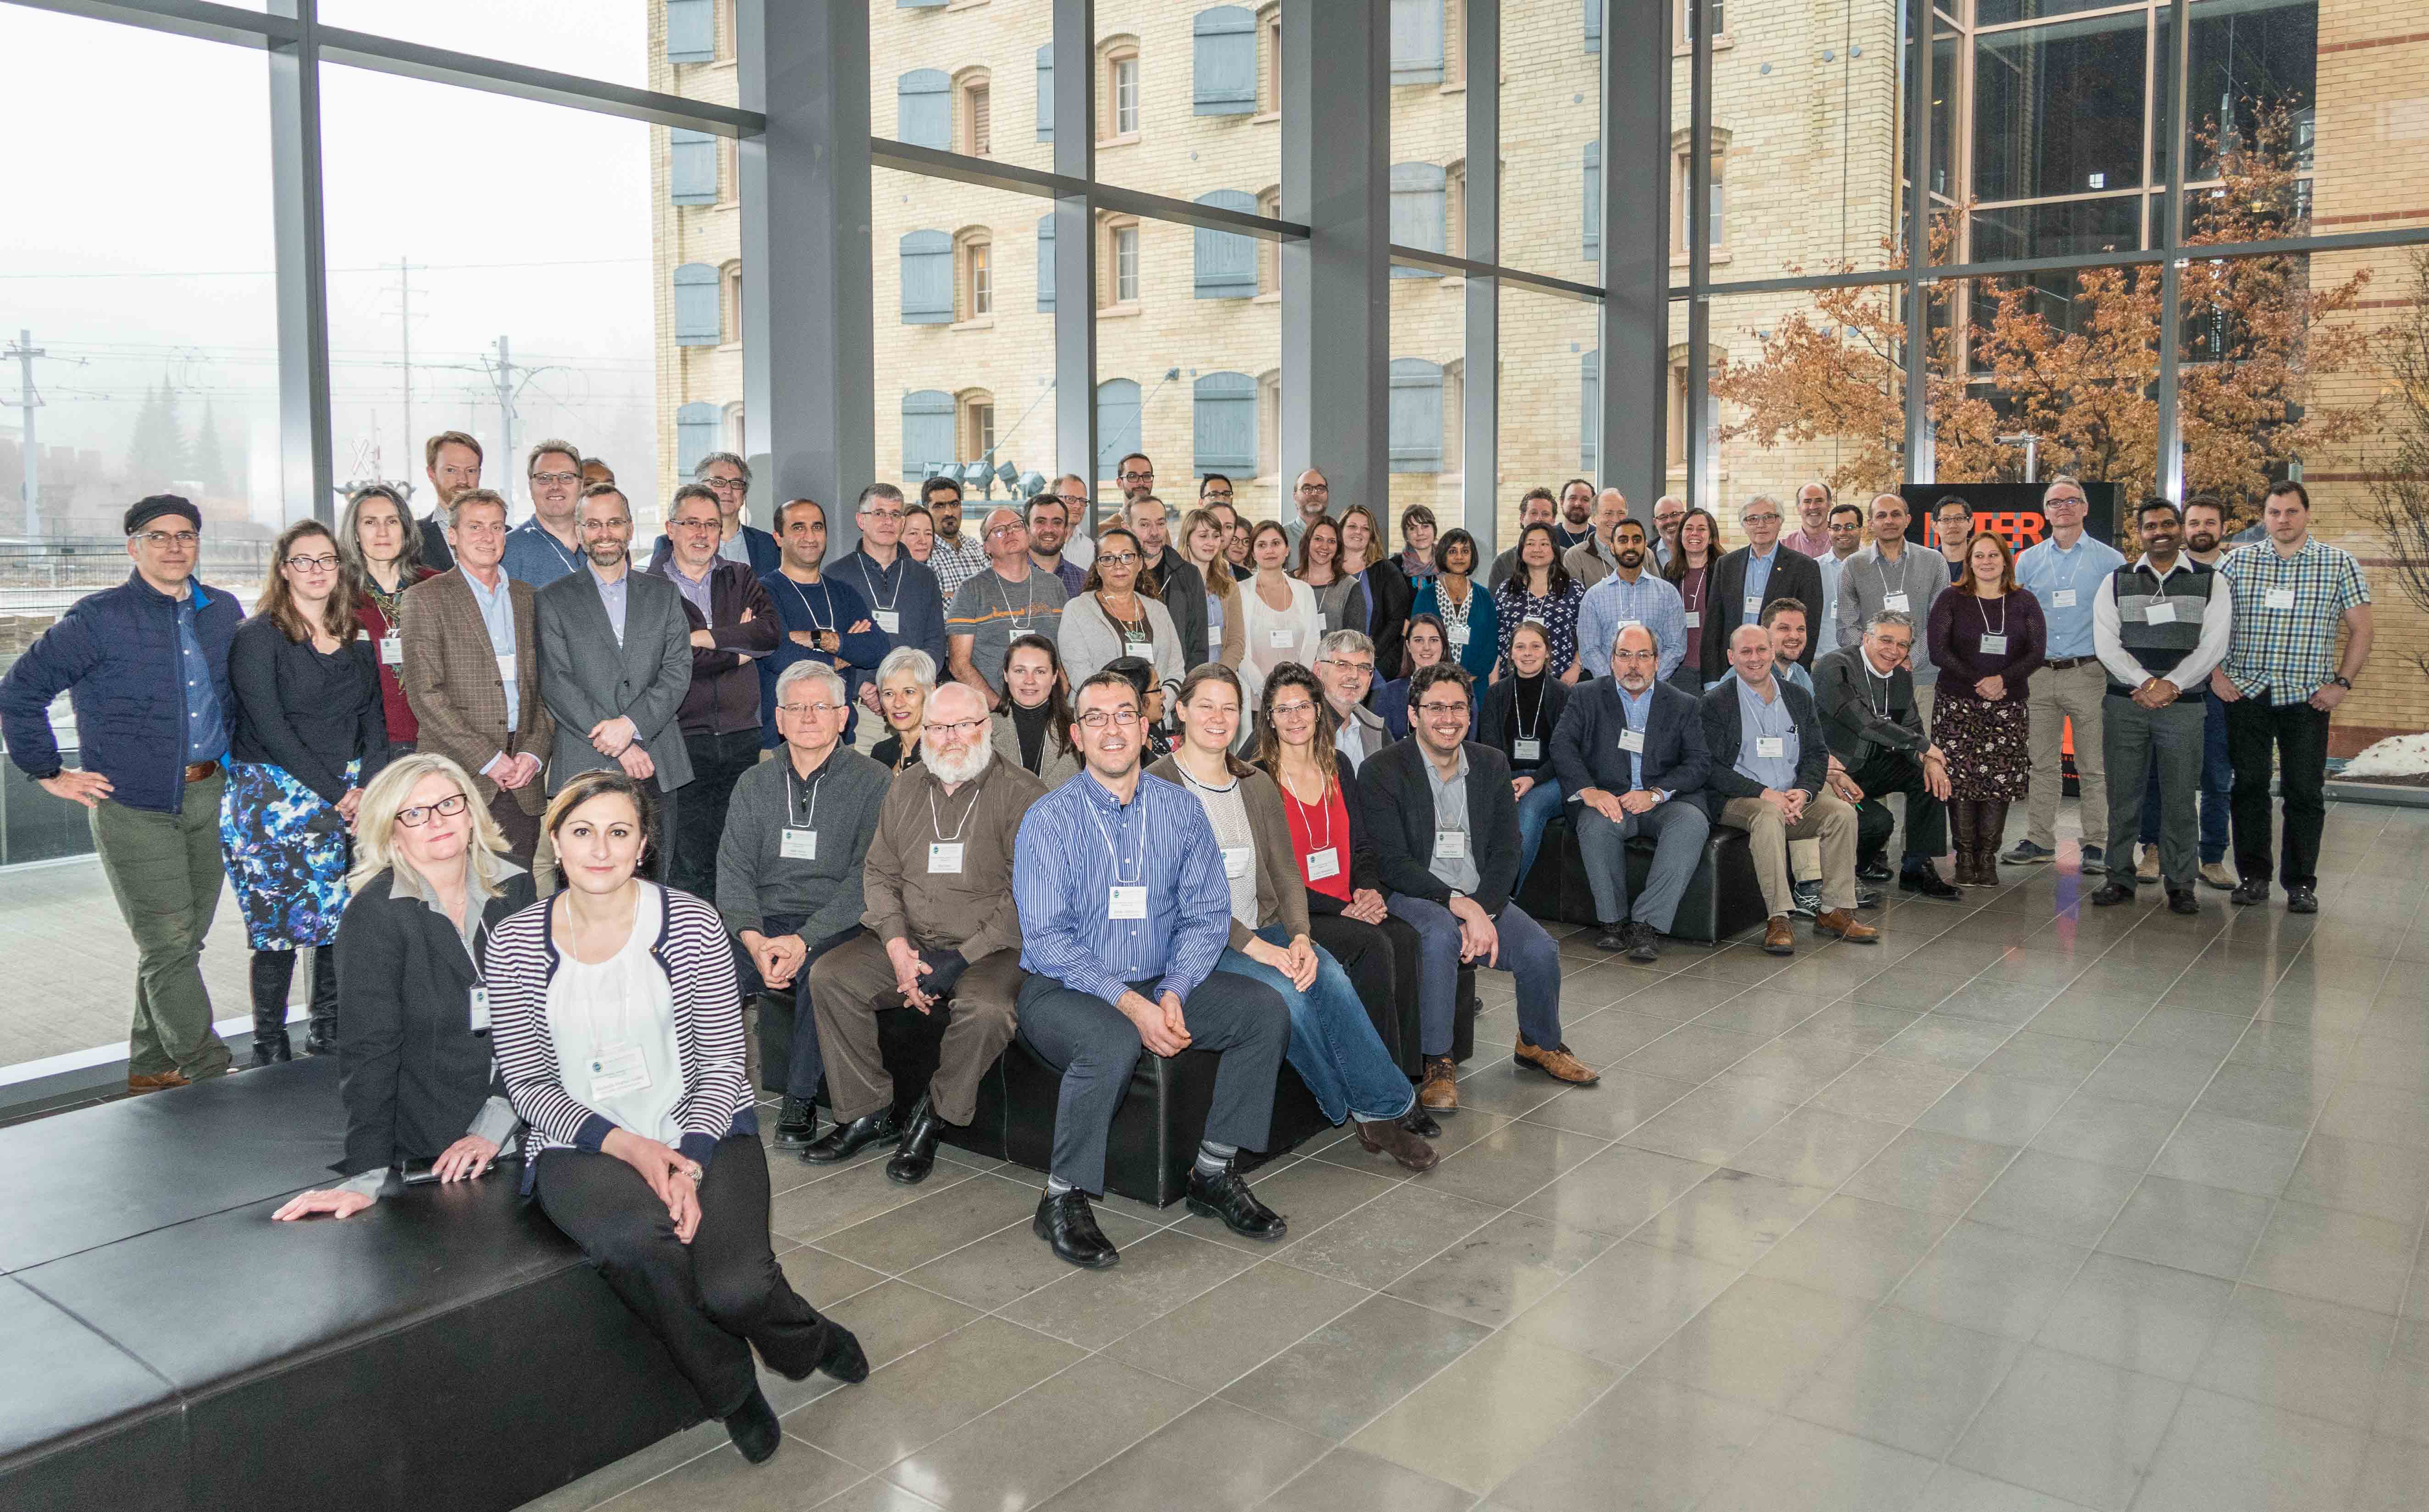 The GWF Inception Meeting was attended by over 80 individuals, comprised of researchers, support staff, principle investigators, project managers, and more... 